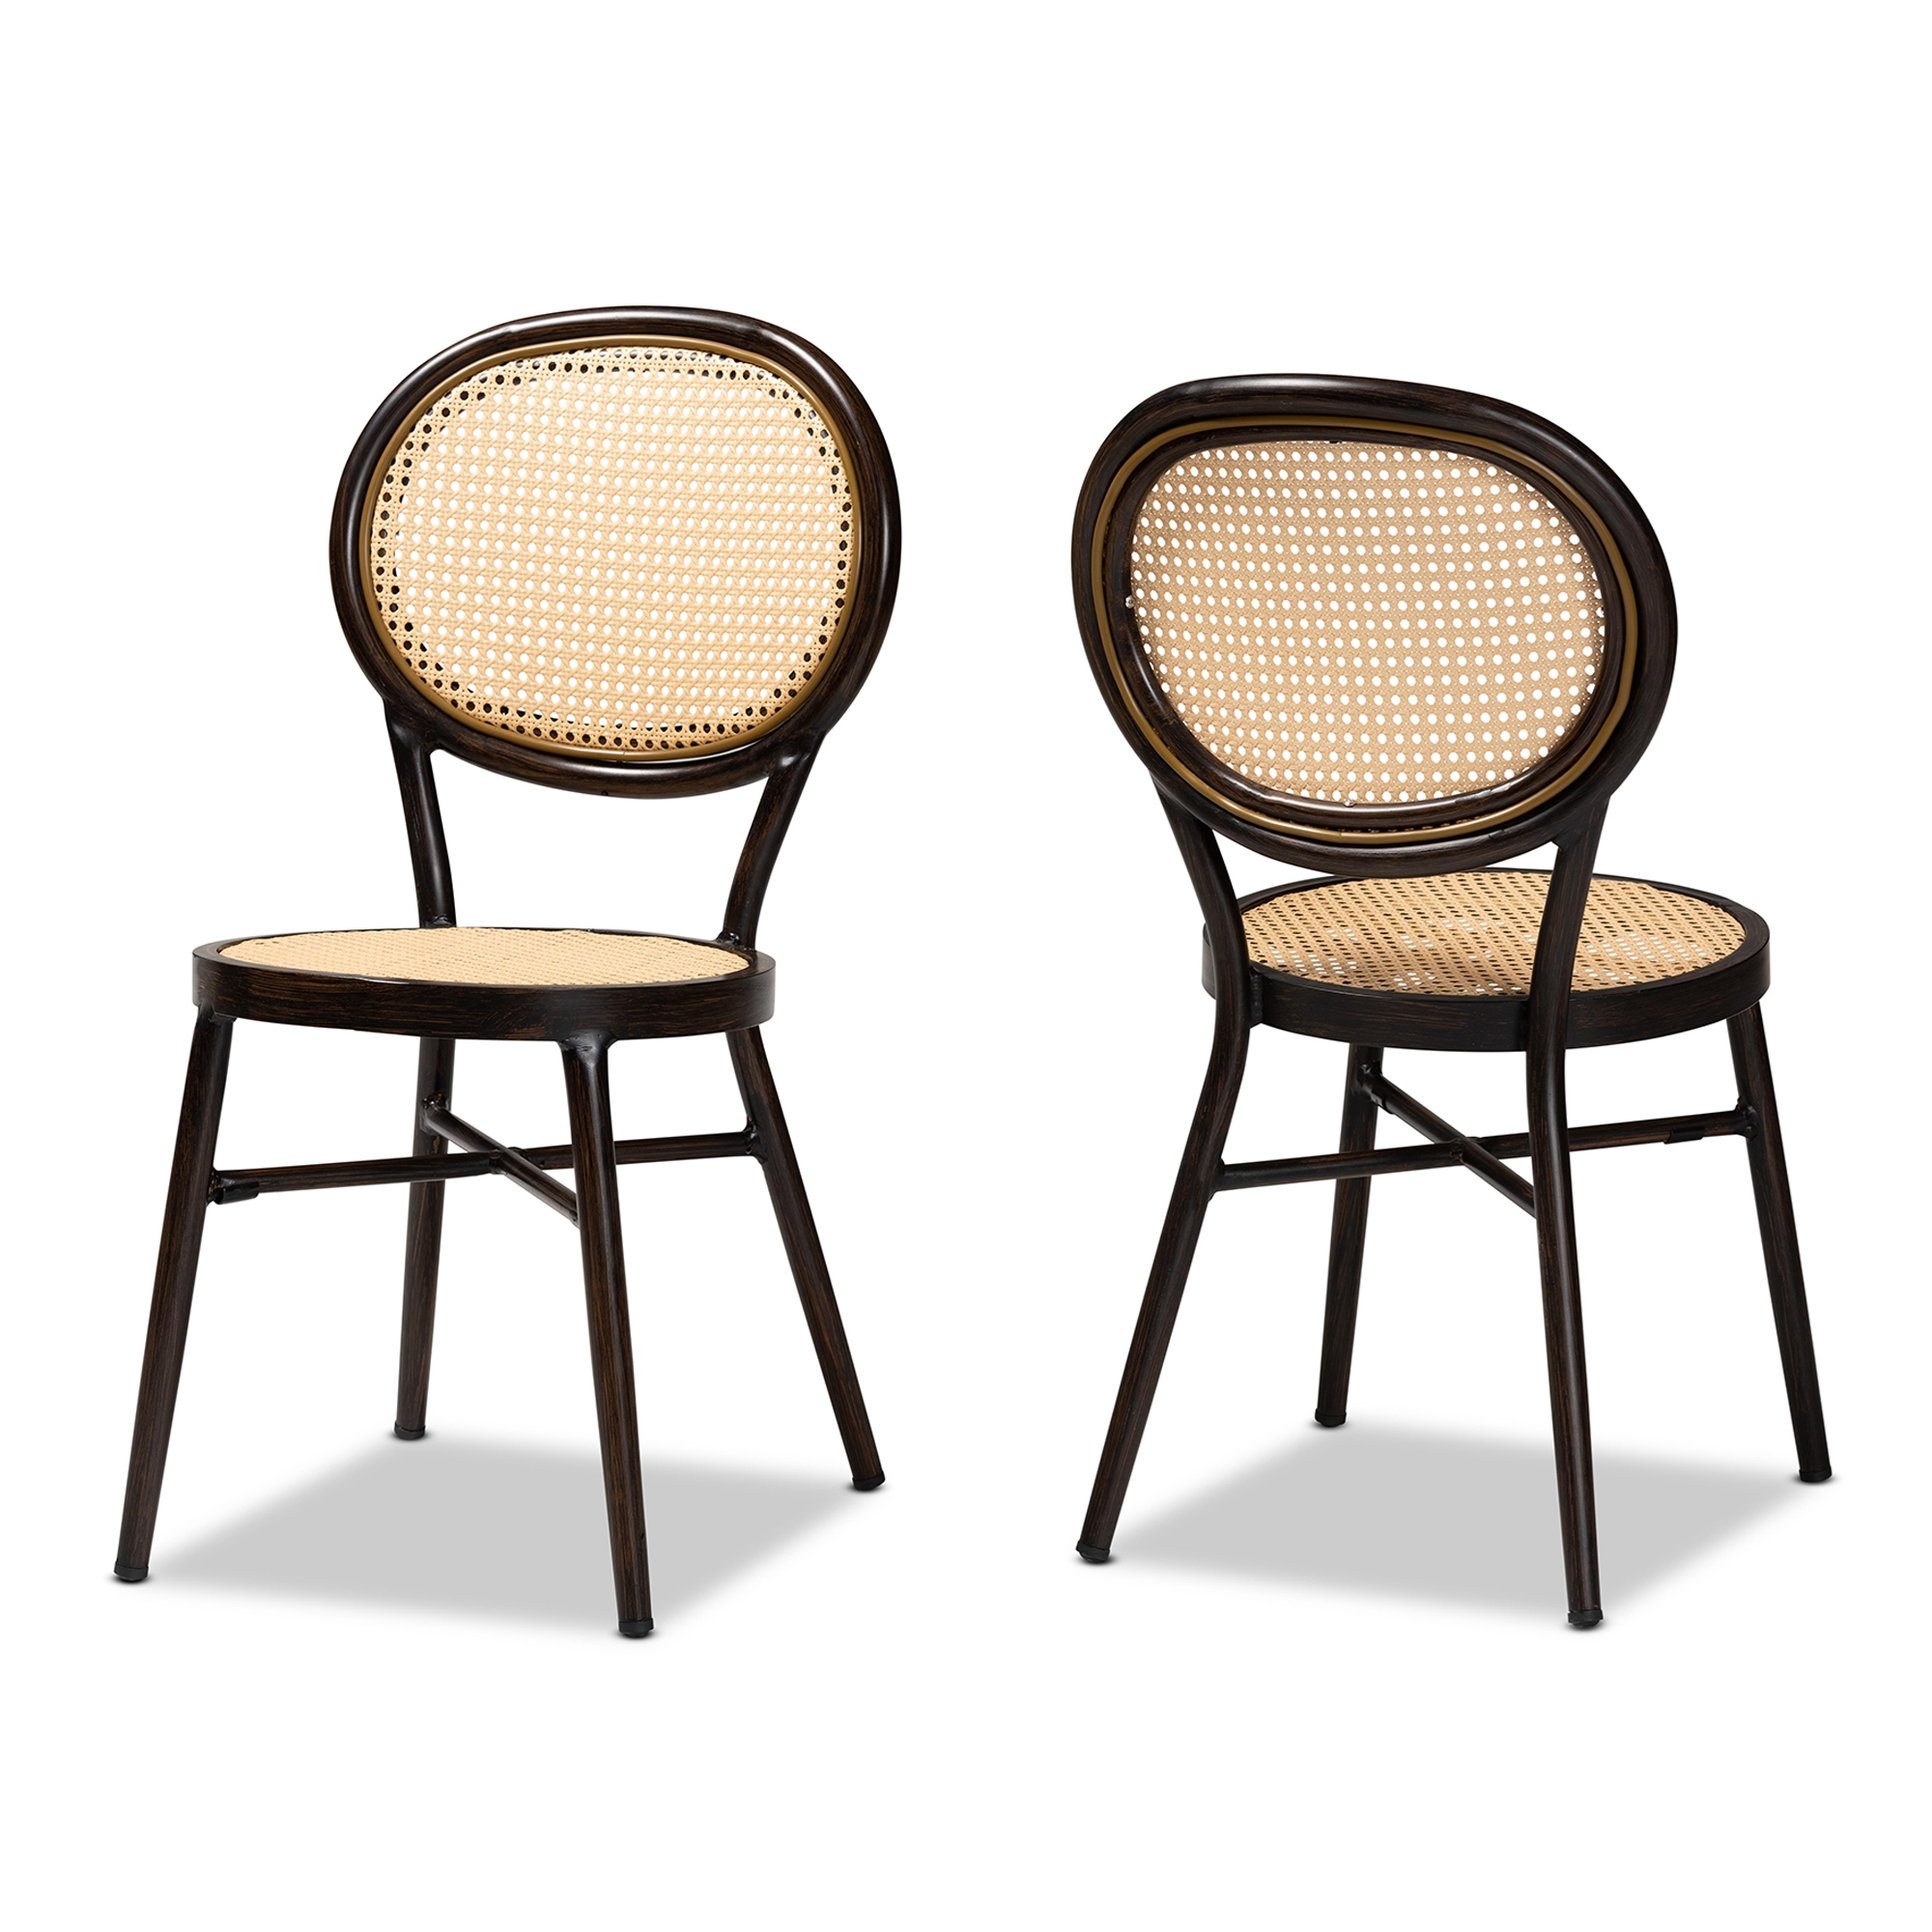 Baxton Studio Thalia Mid-Century Modern Dark Brown Finished Metal and Synthetic Rattan 2-Piece Outdoor Dining Chair Set